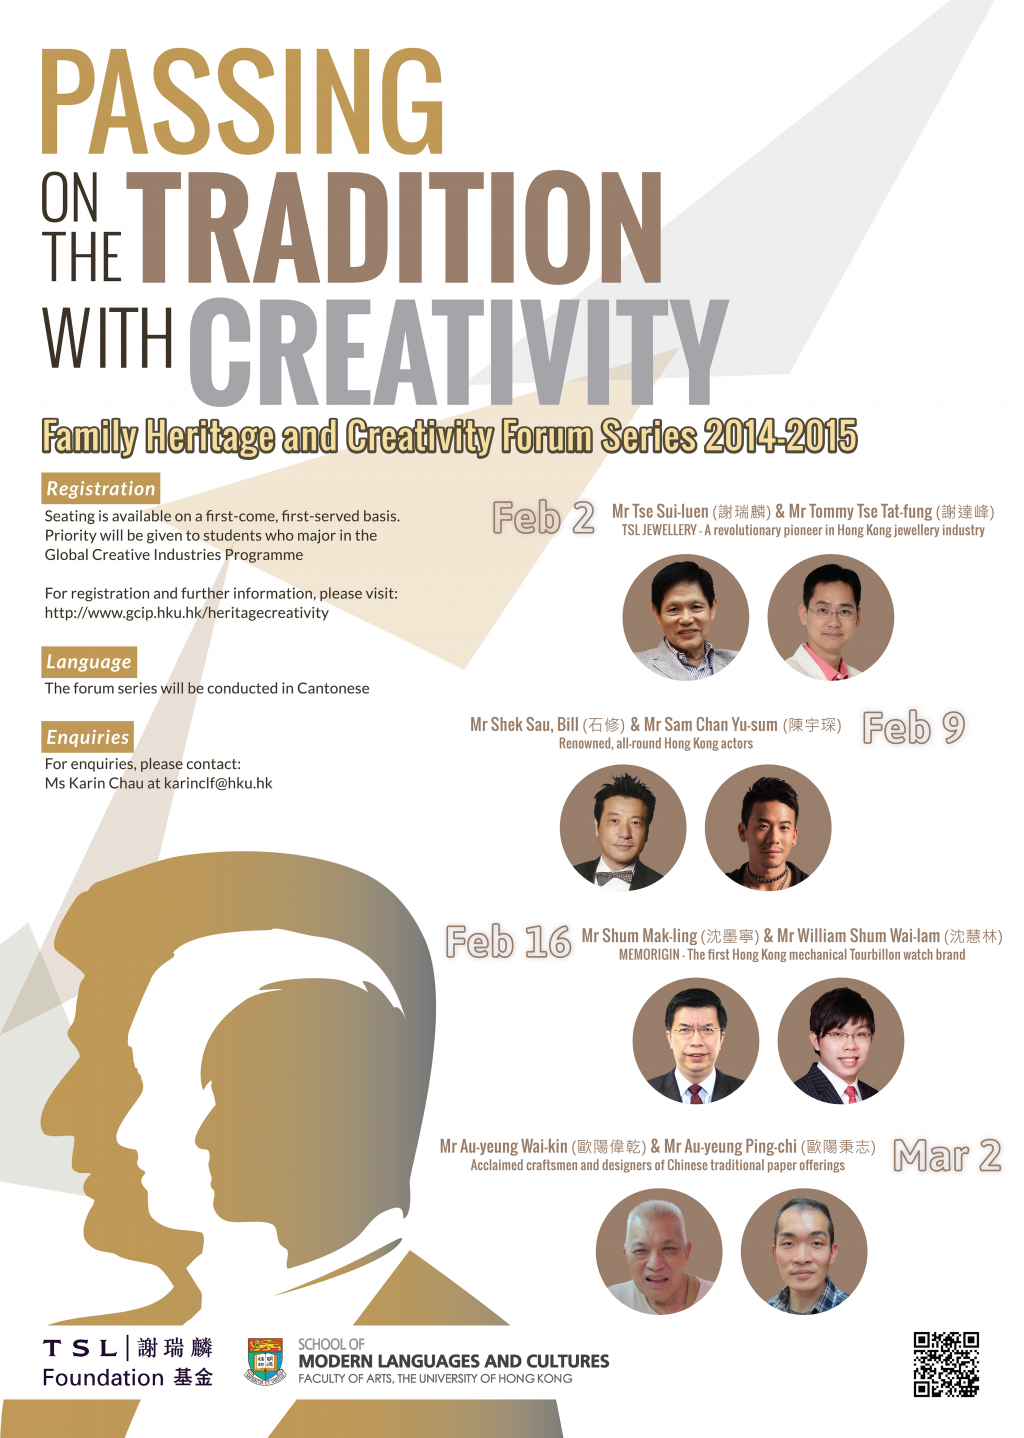 Passing on the Tradition with Creativity: Family Heritage and Creativity Forum Series 2014 - 2015